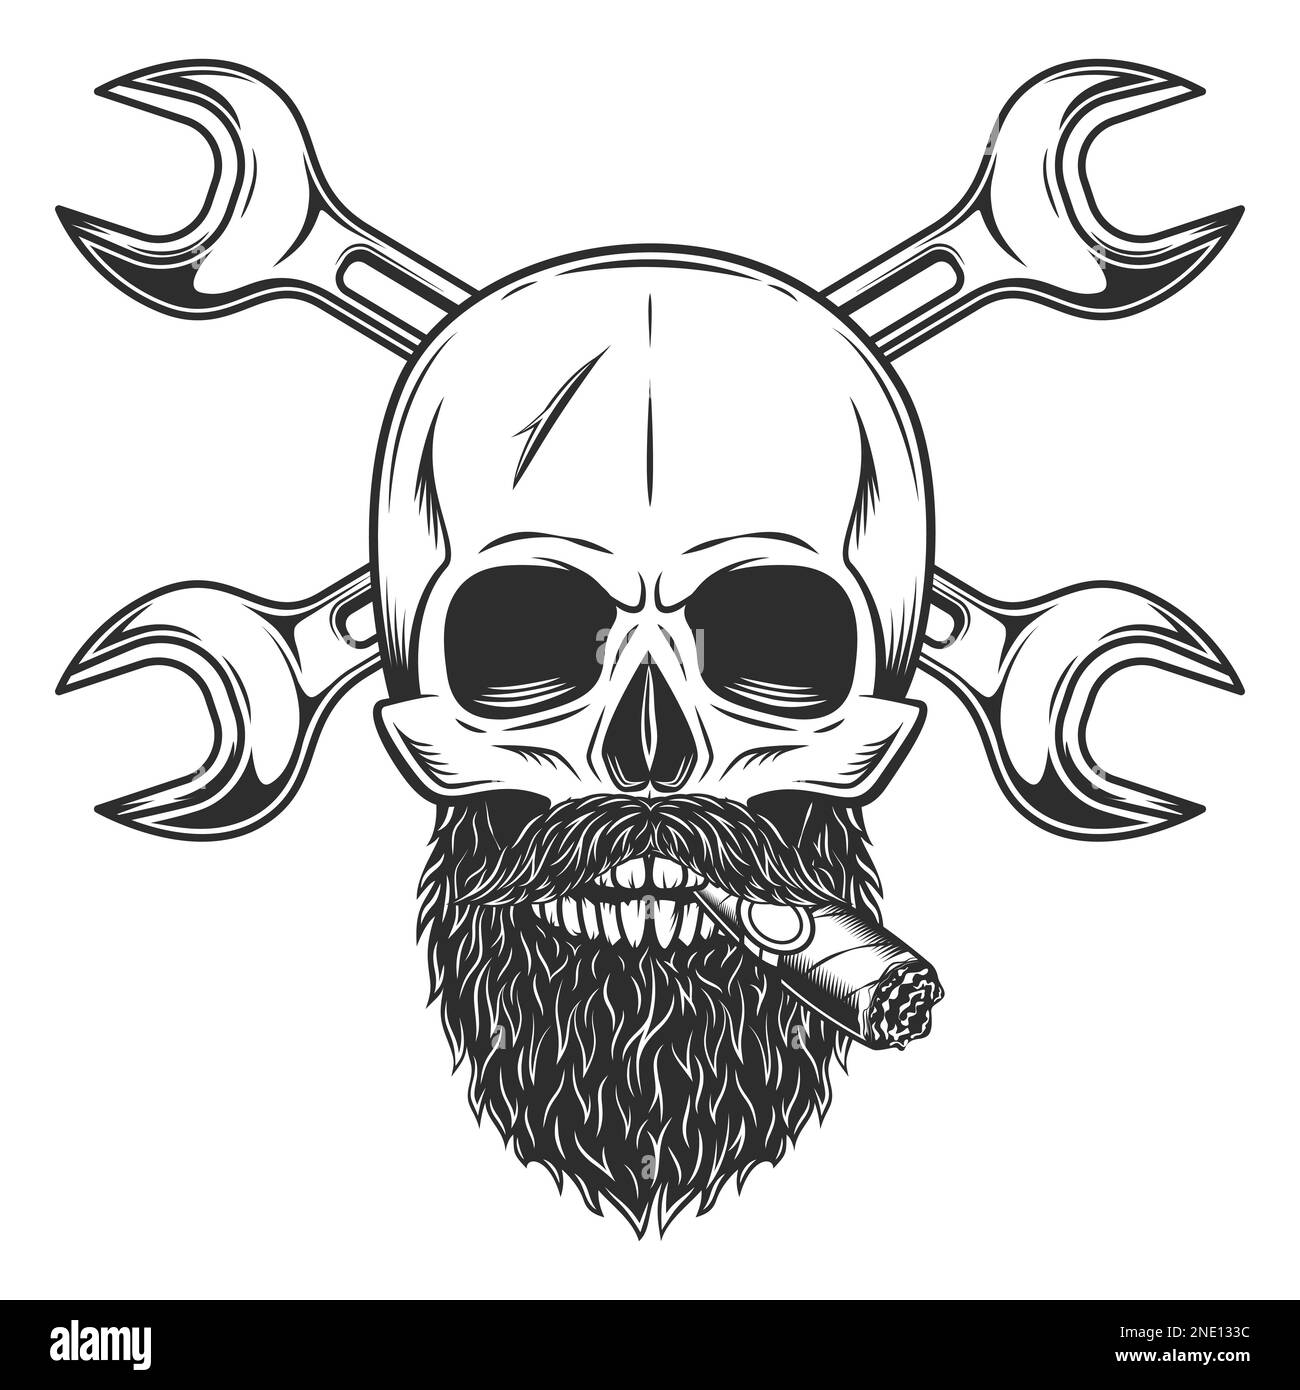 Skull with mustache and beard with smoking cigar or cigarette and ...